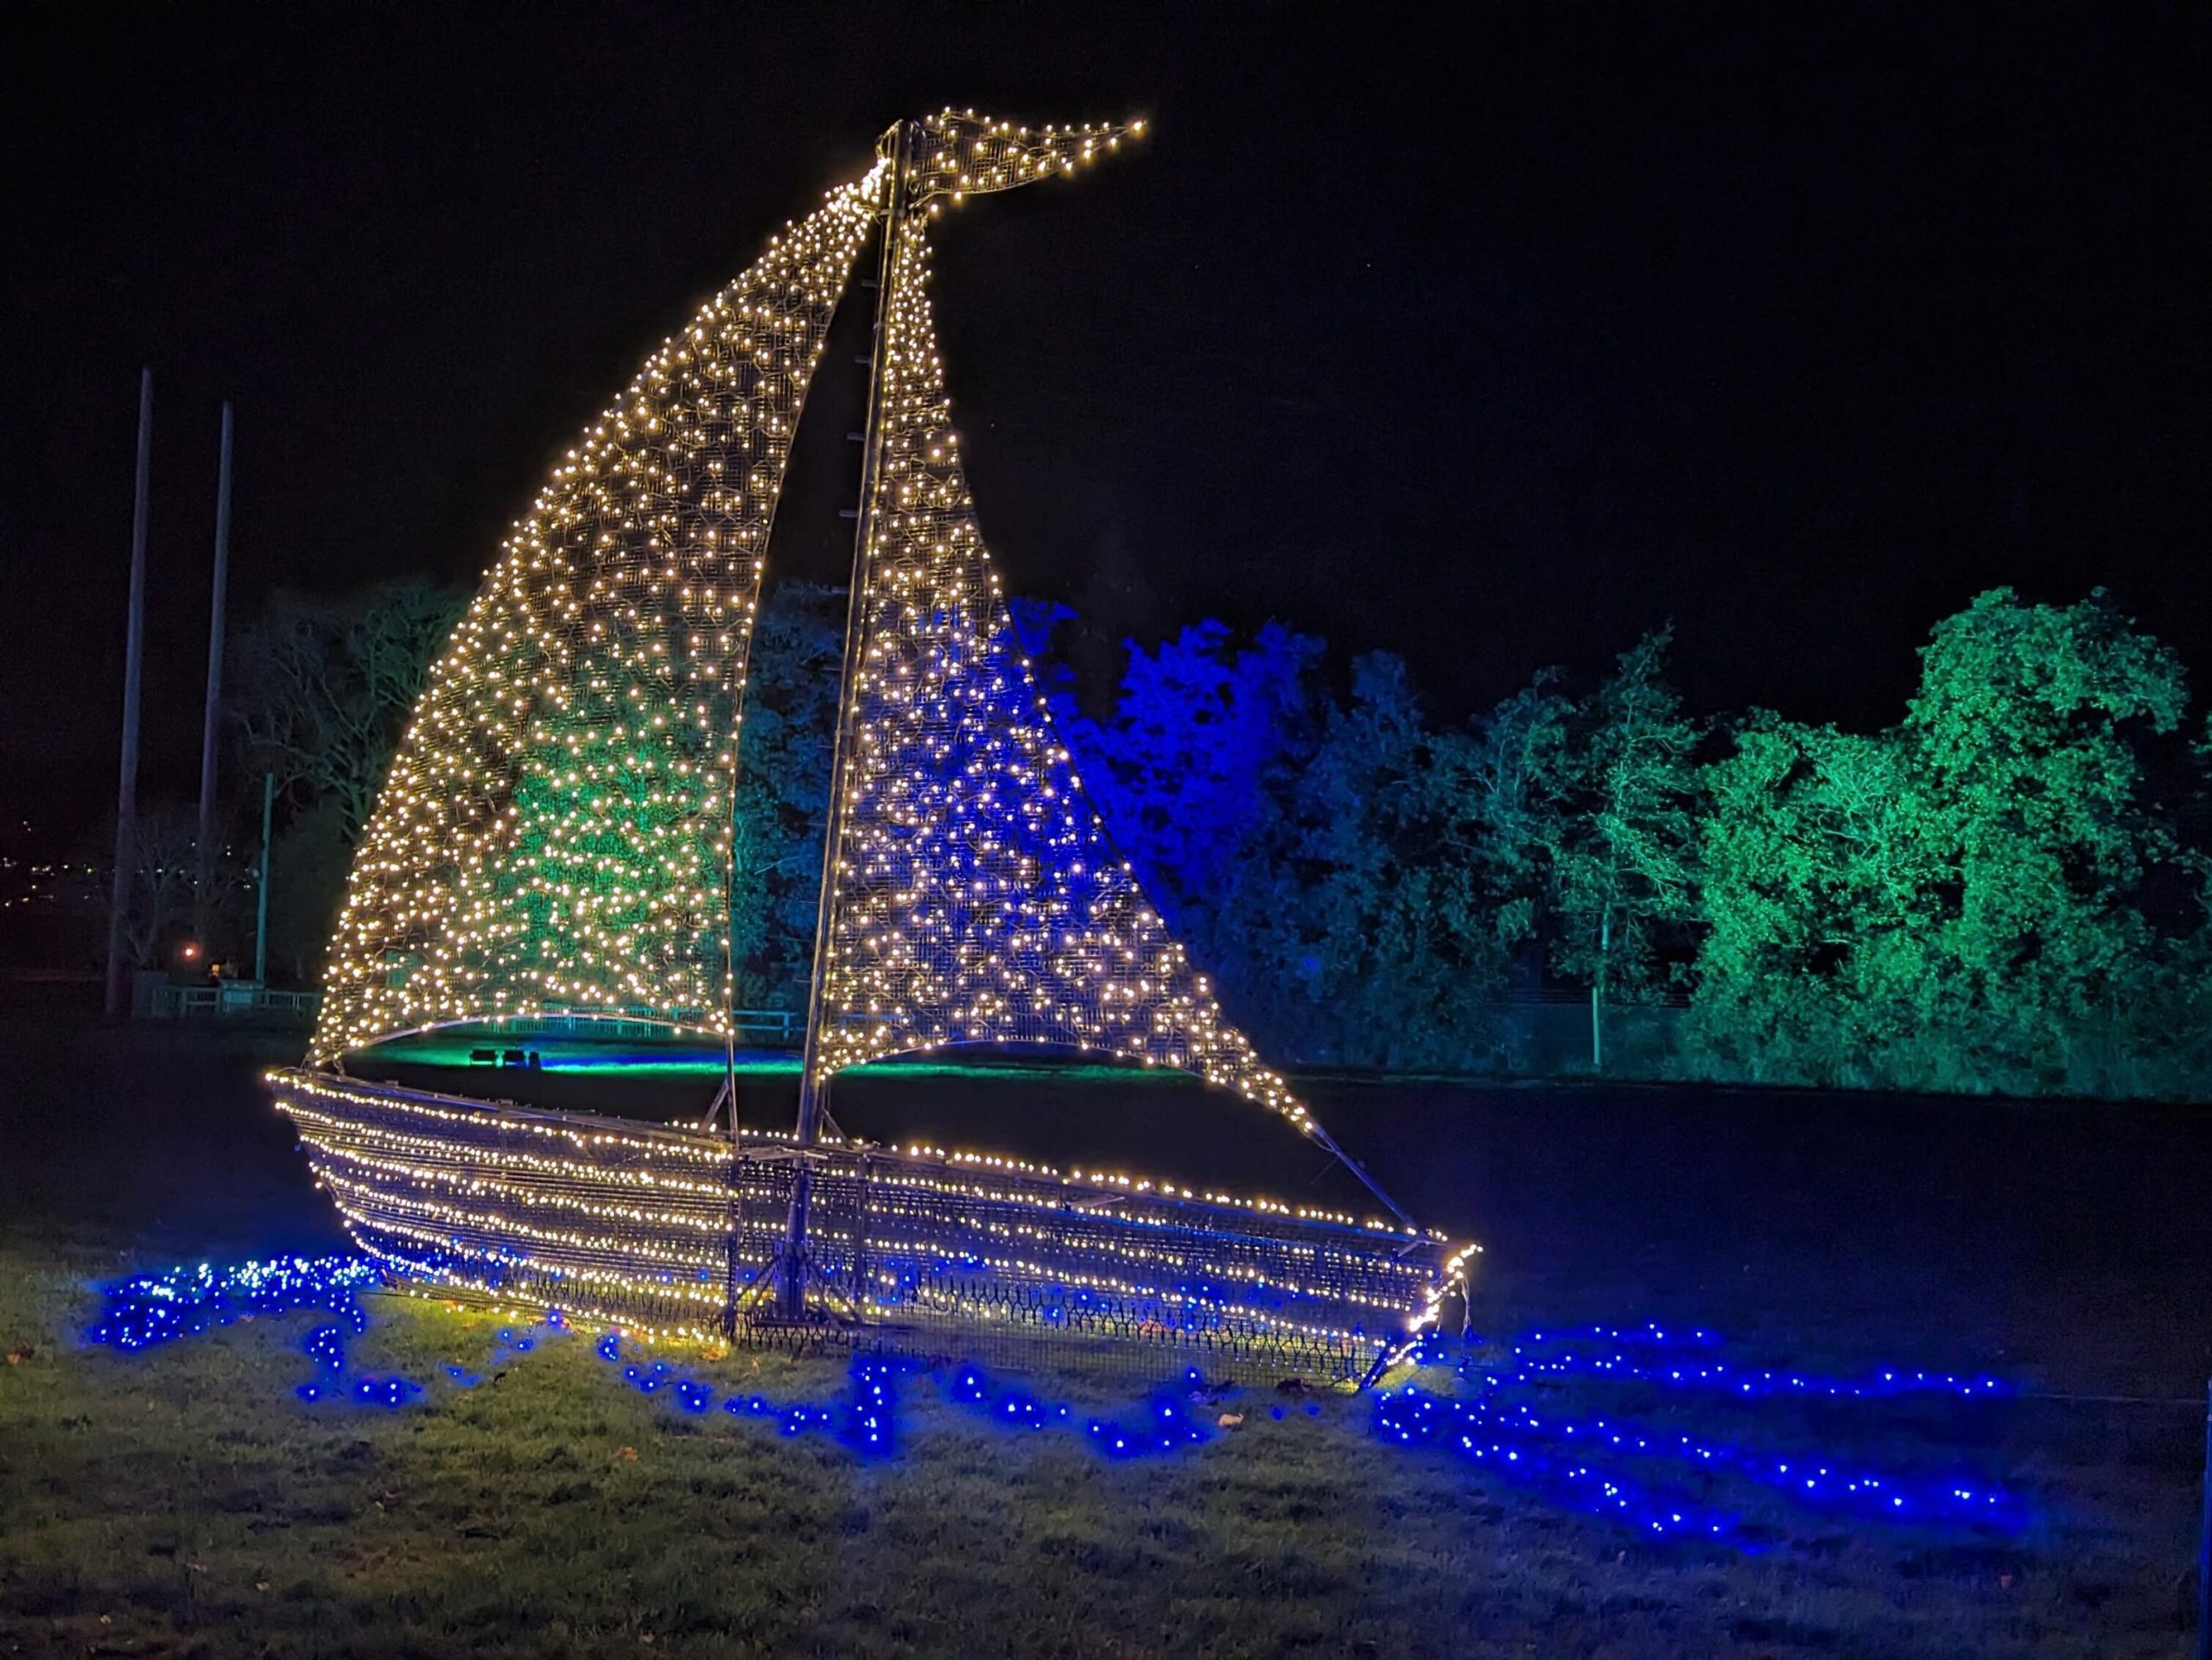 Boat of lights at Winter Glow